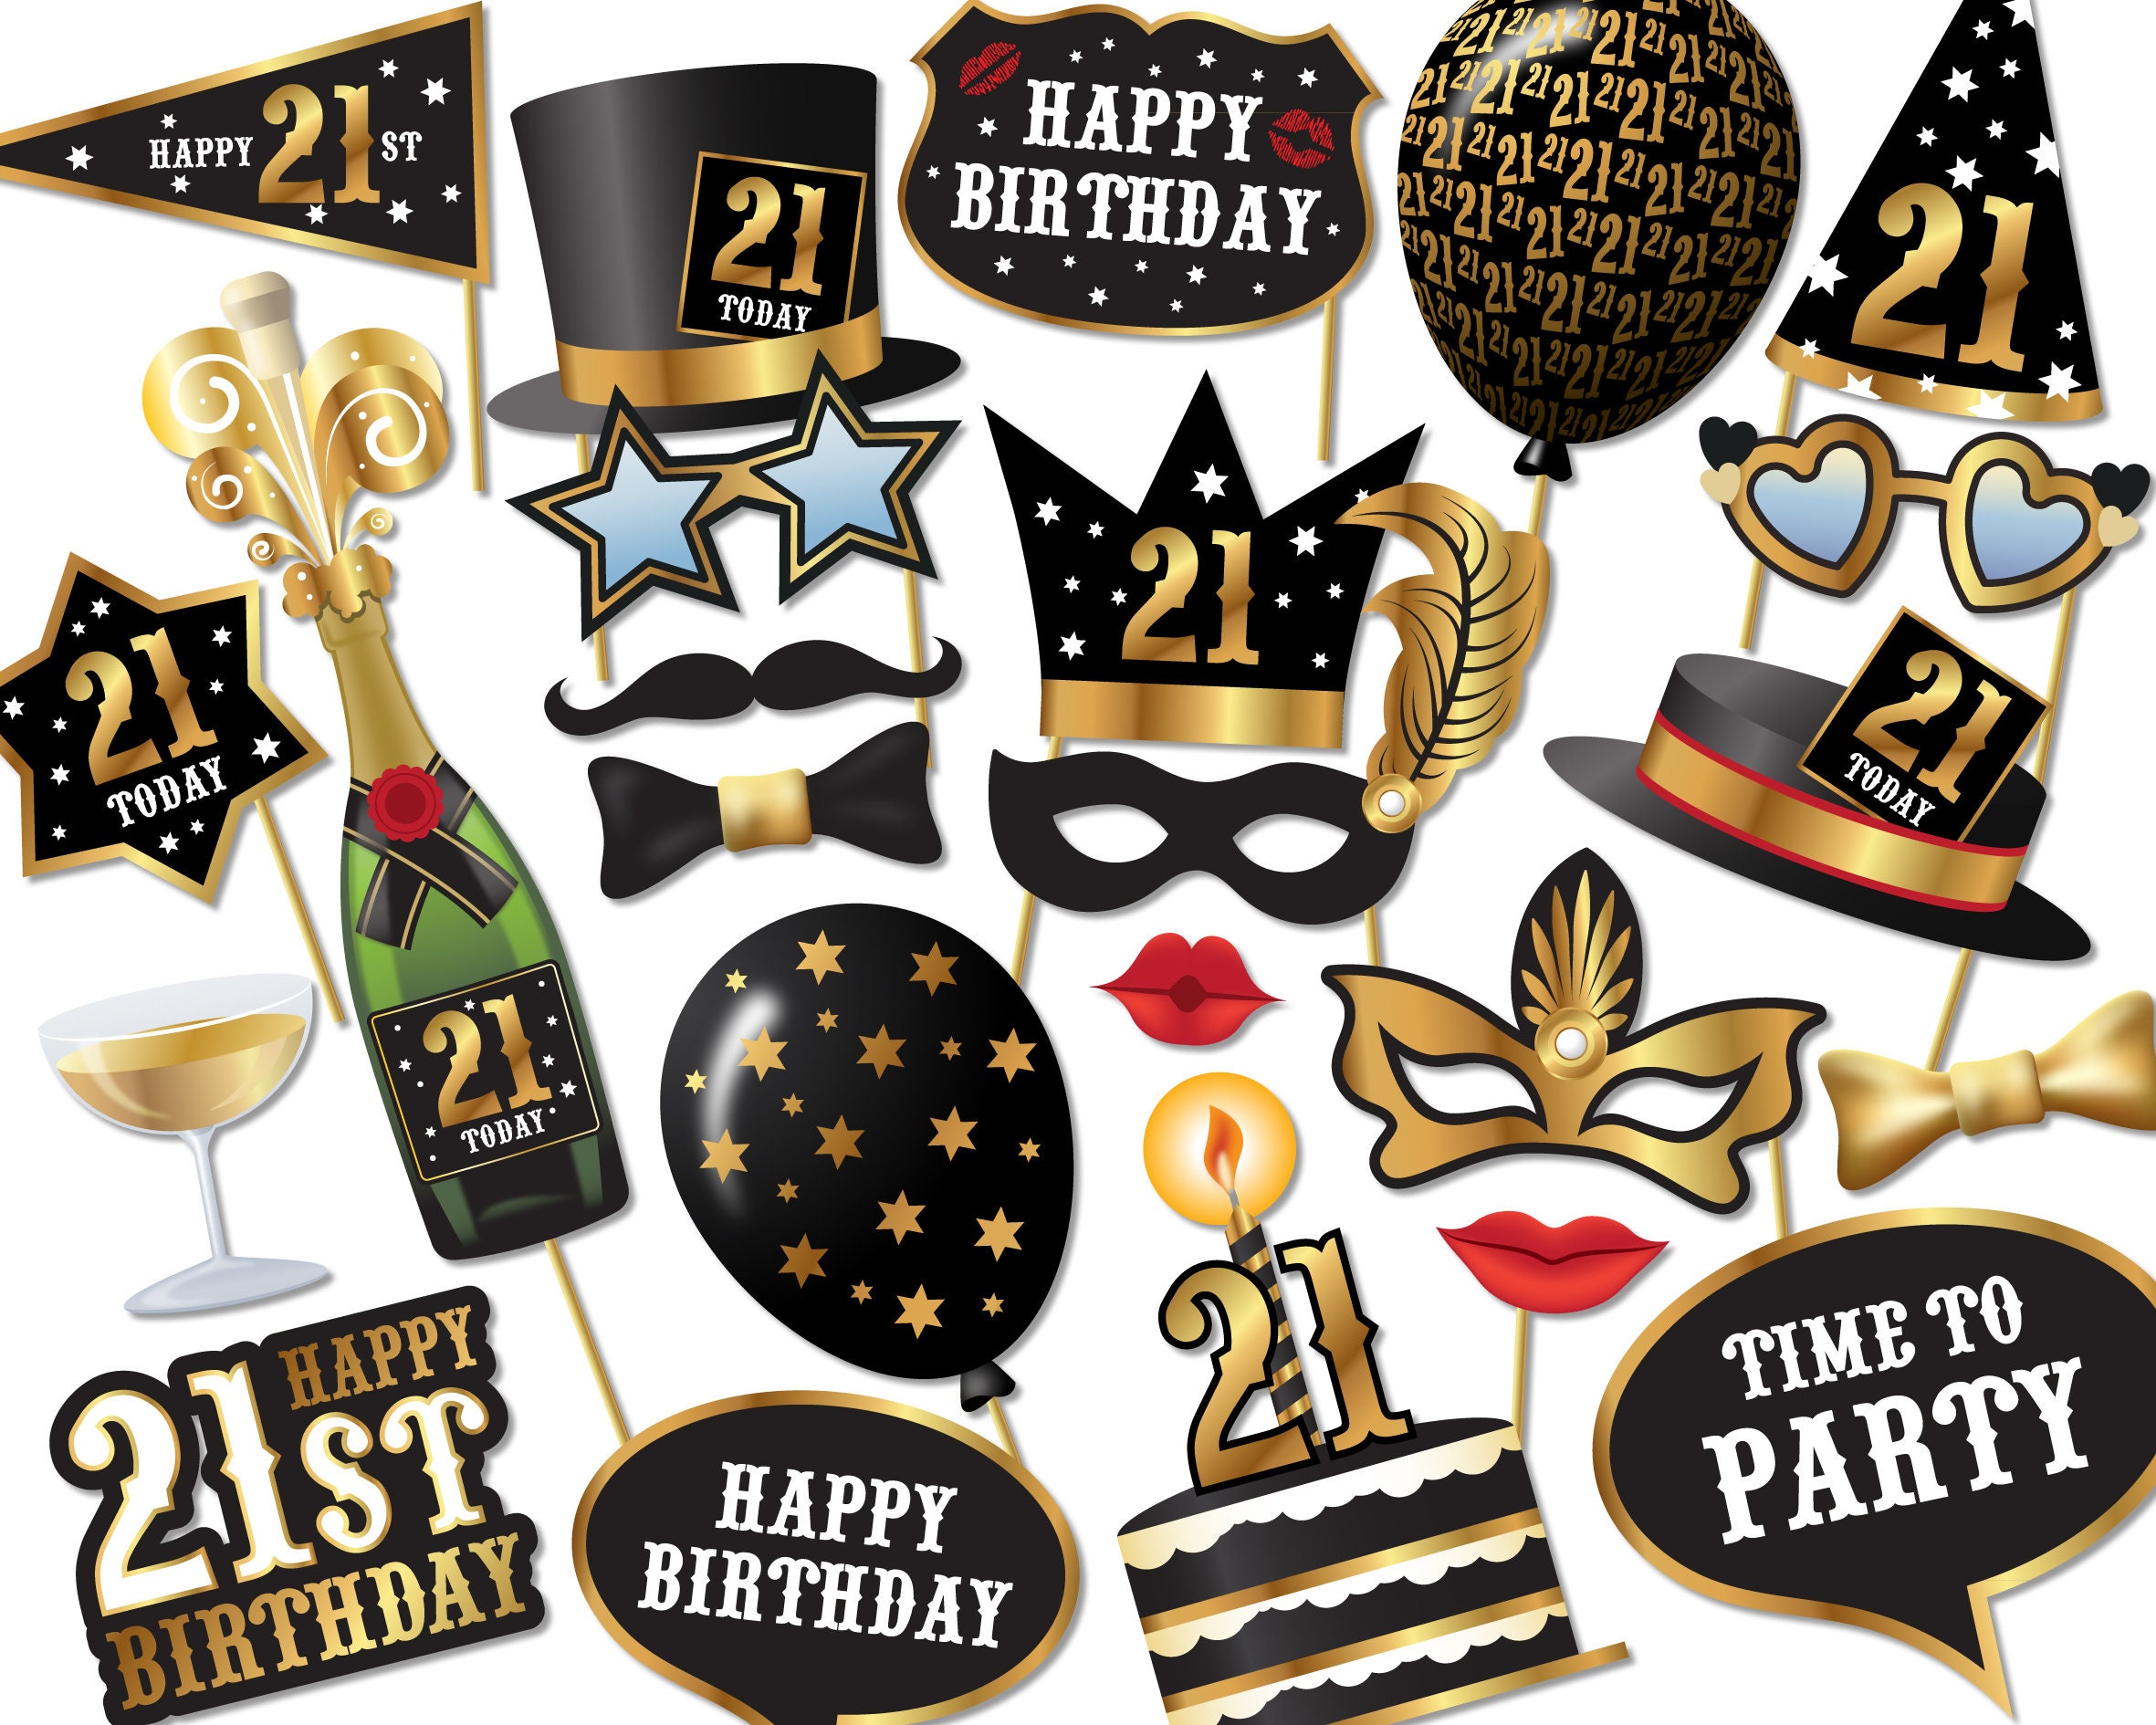 21st-birthday-photo-booth-props-instant-download-printable